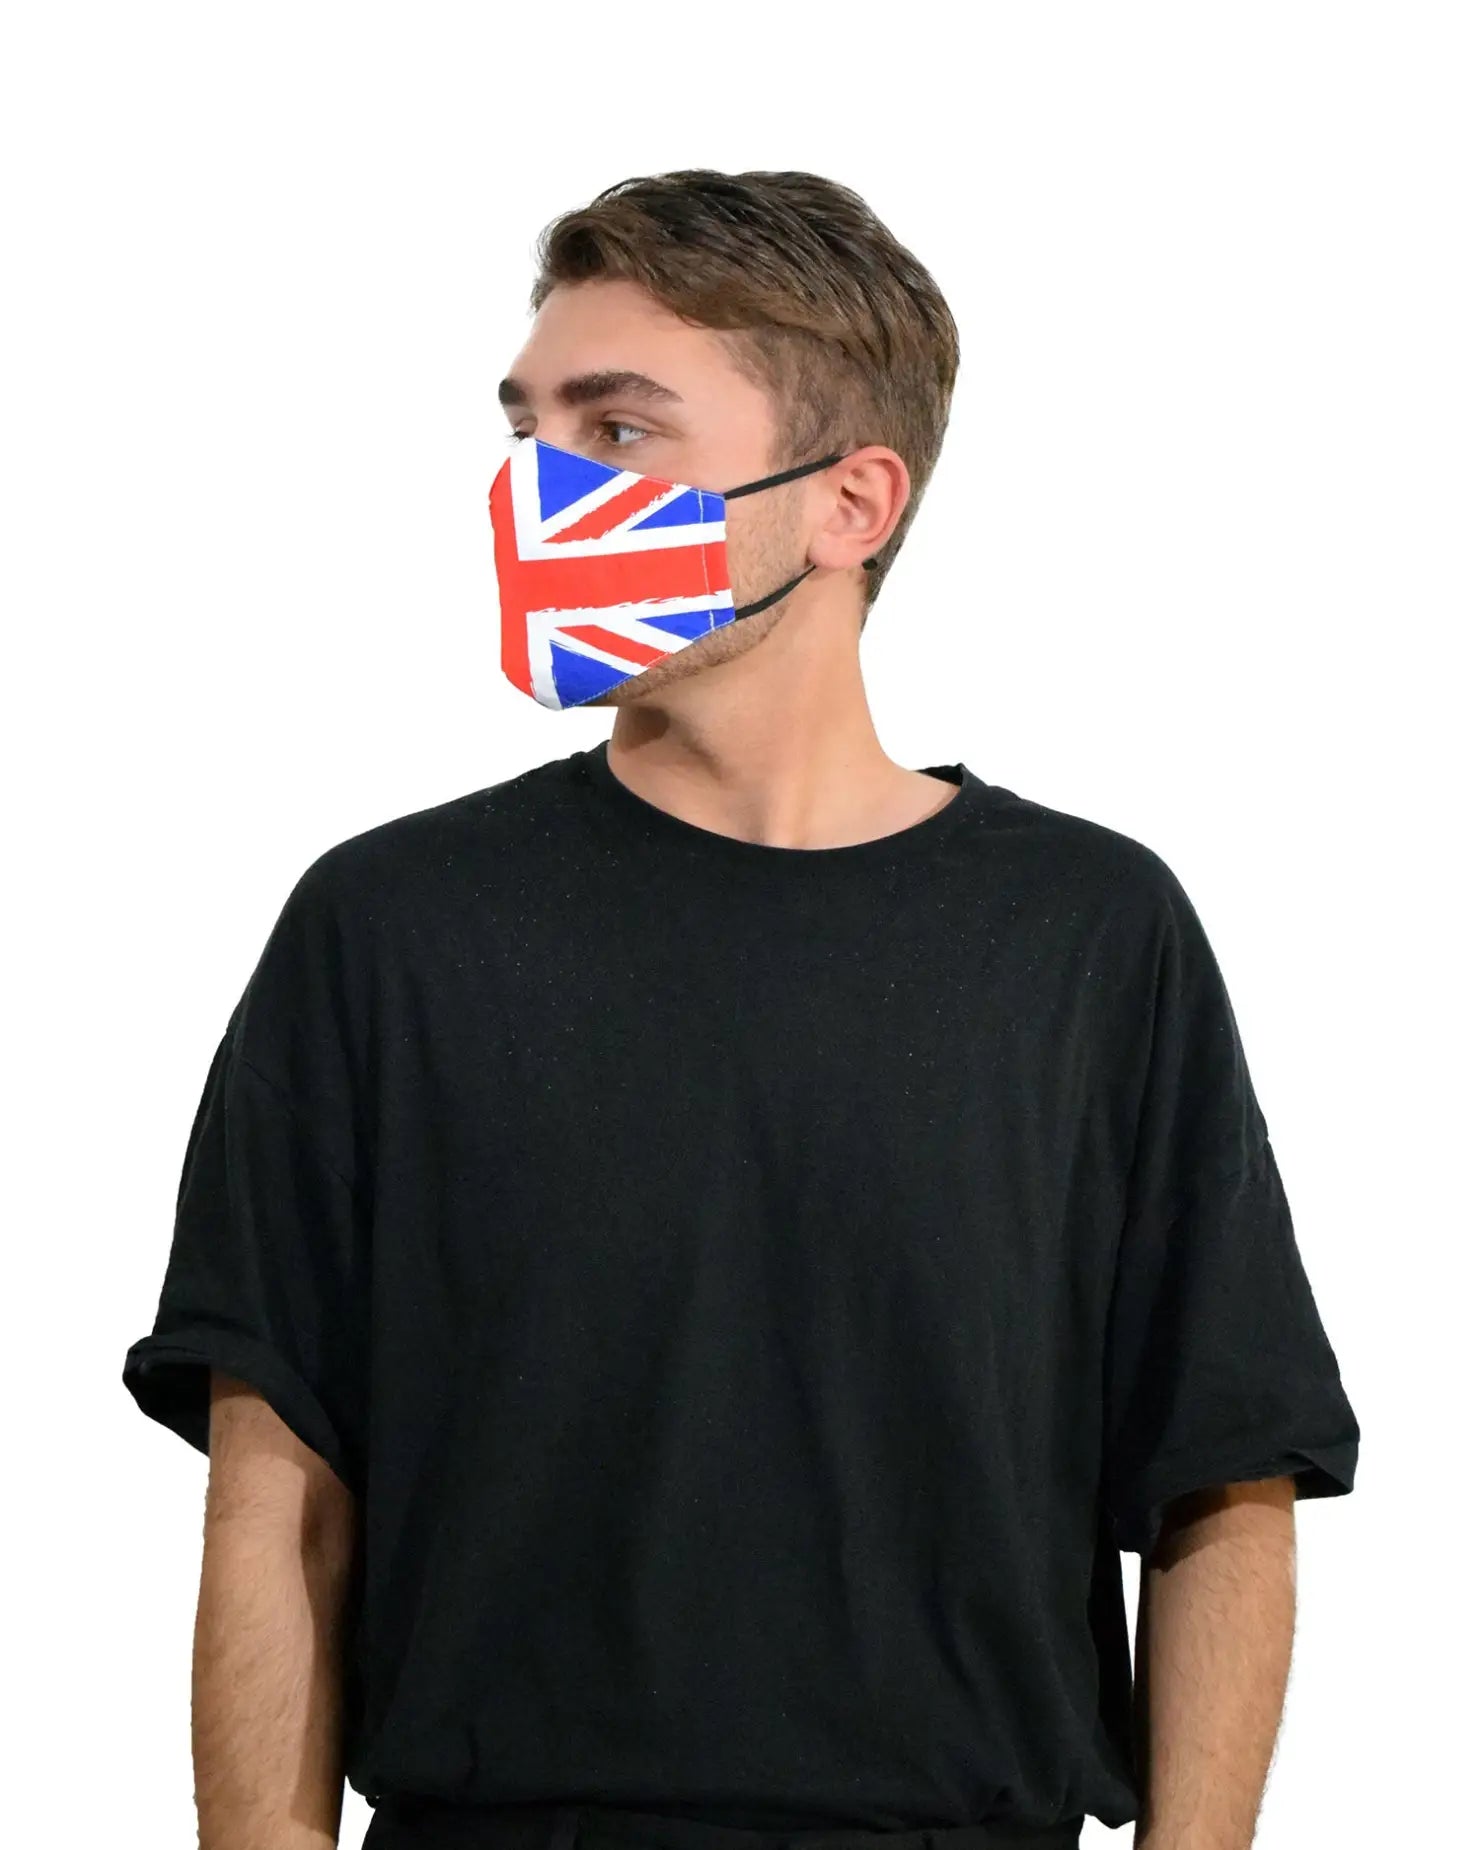 Man wearing British flag face mask from 3D Design 100% Cotton Fashion Face Mask Covering